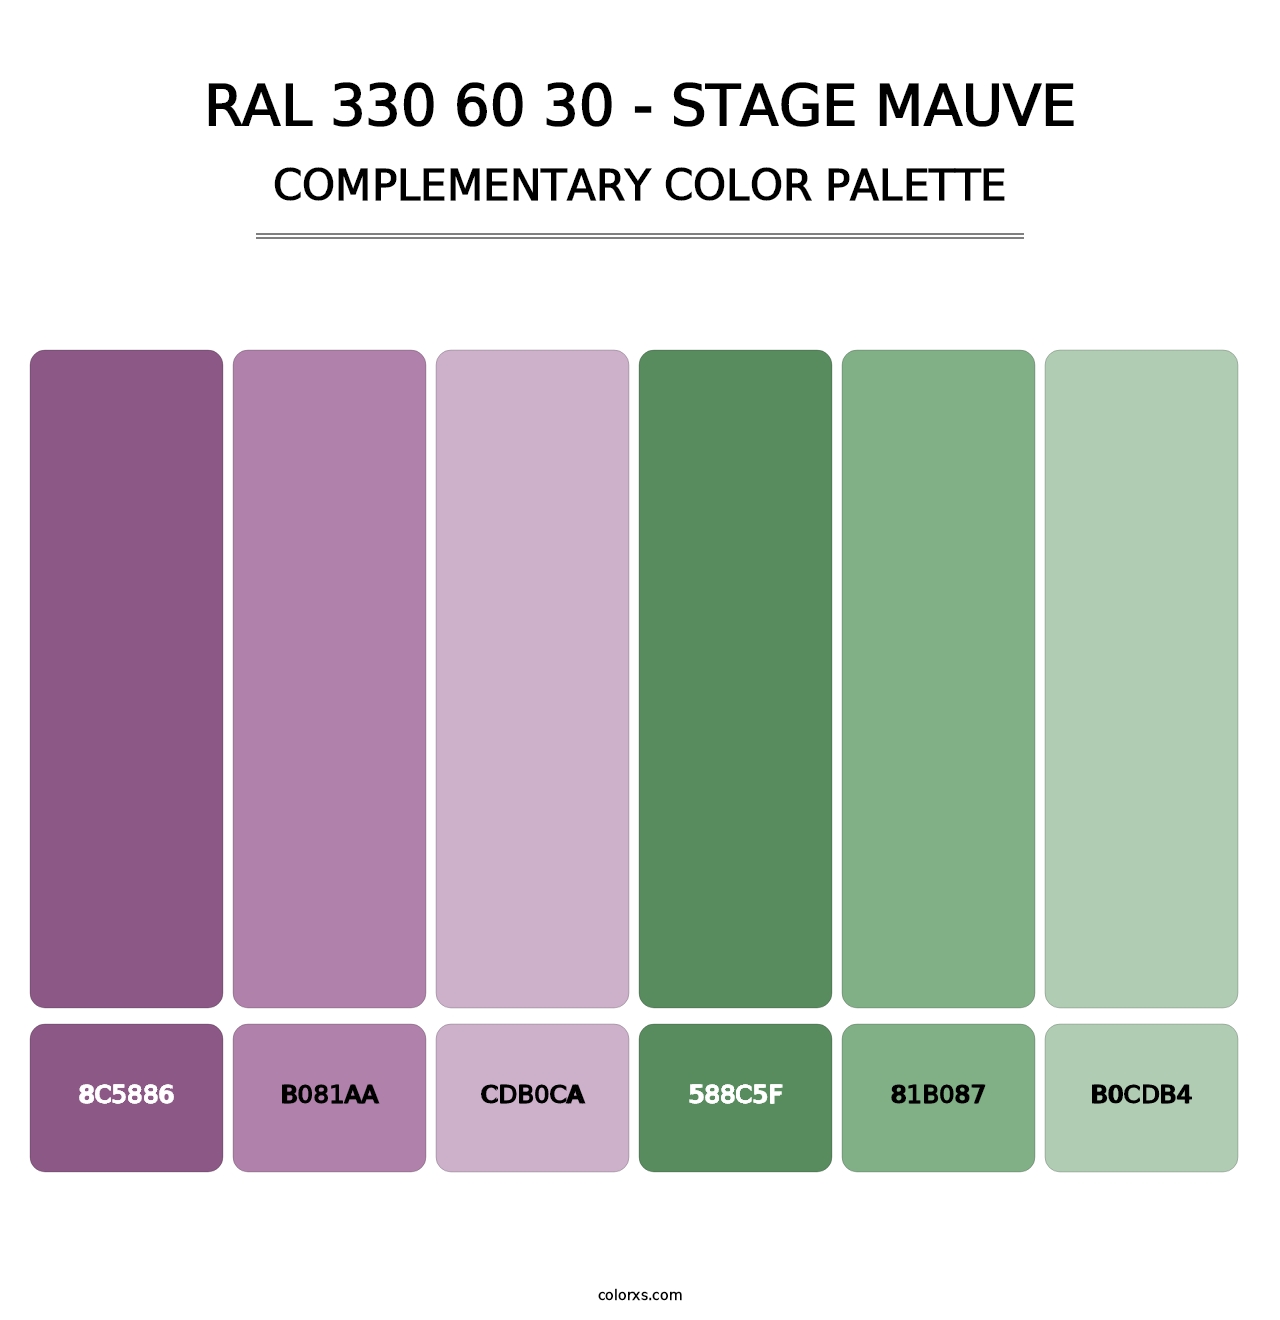 RAL 330 60 30 - Stage Mauve - Complementary Color Palette